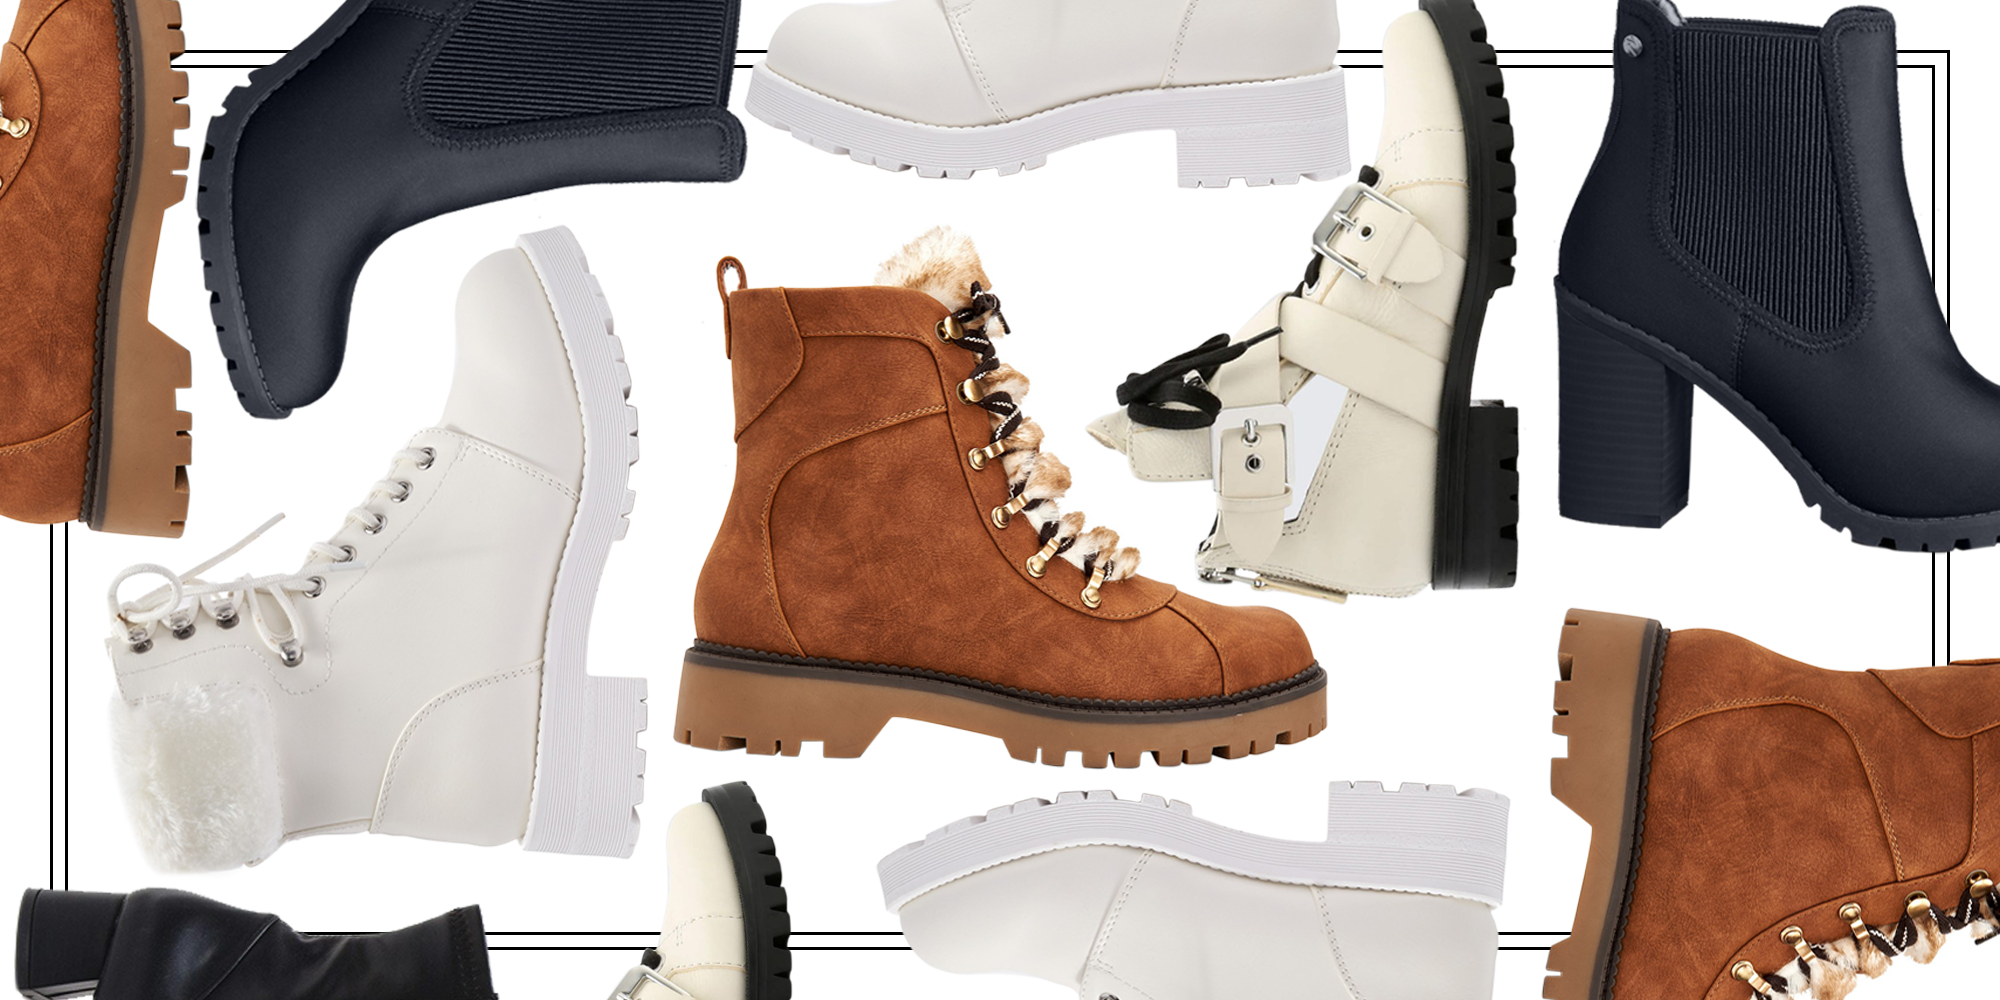 combat style winter boots